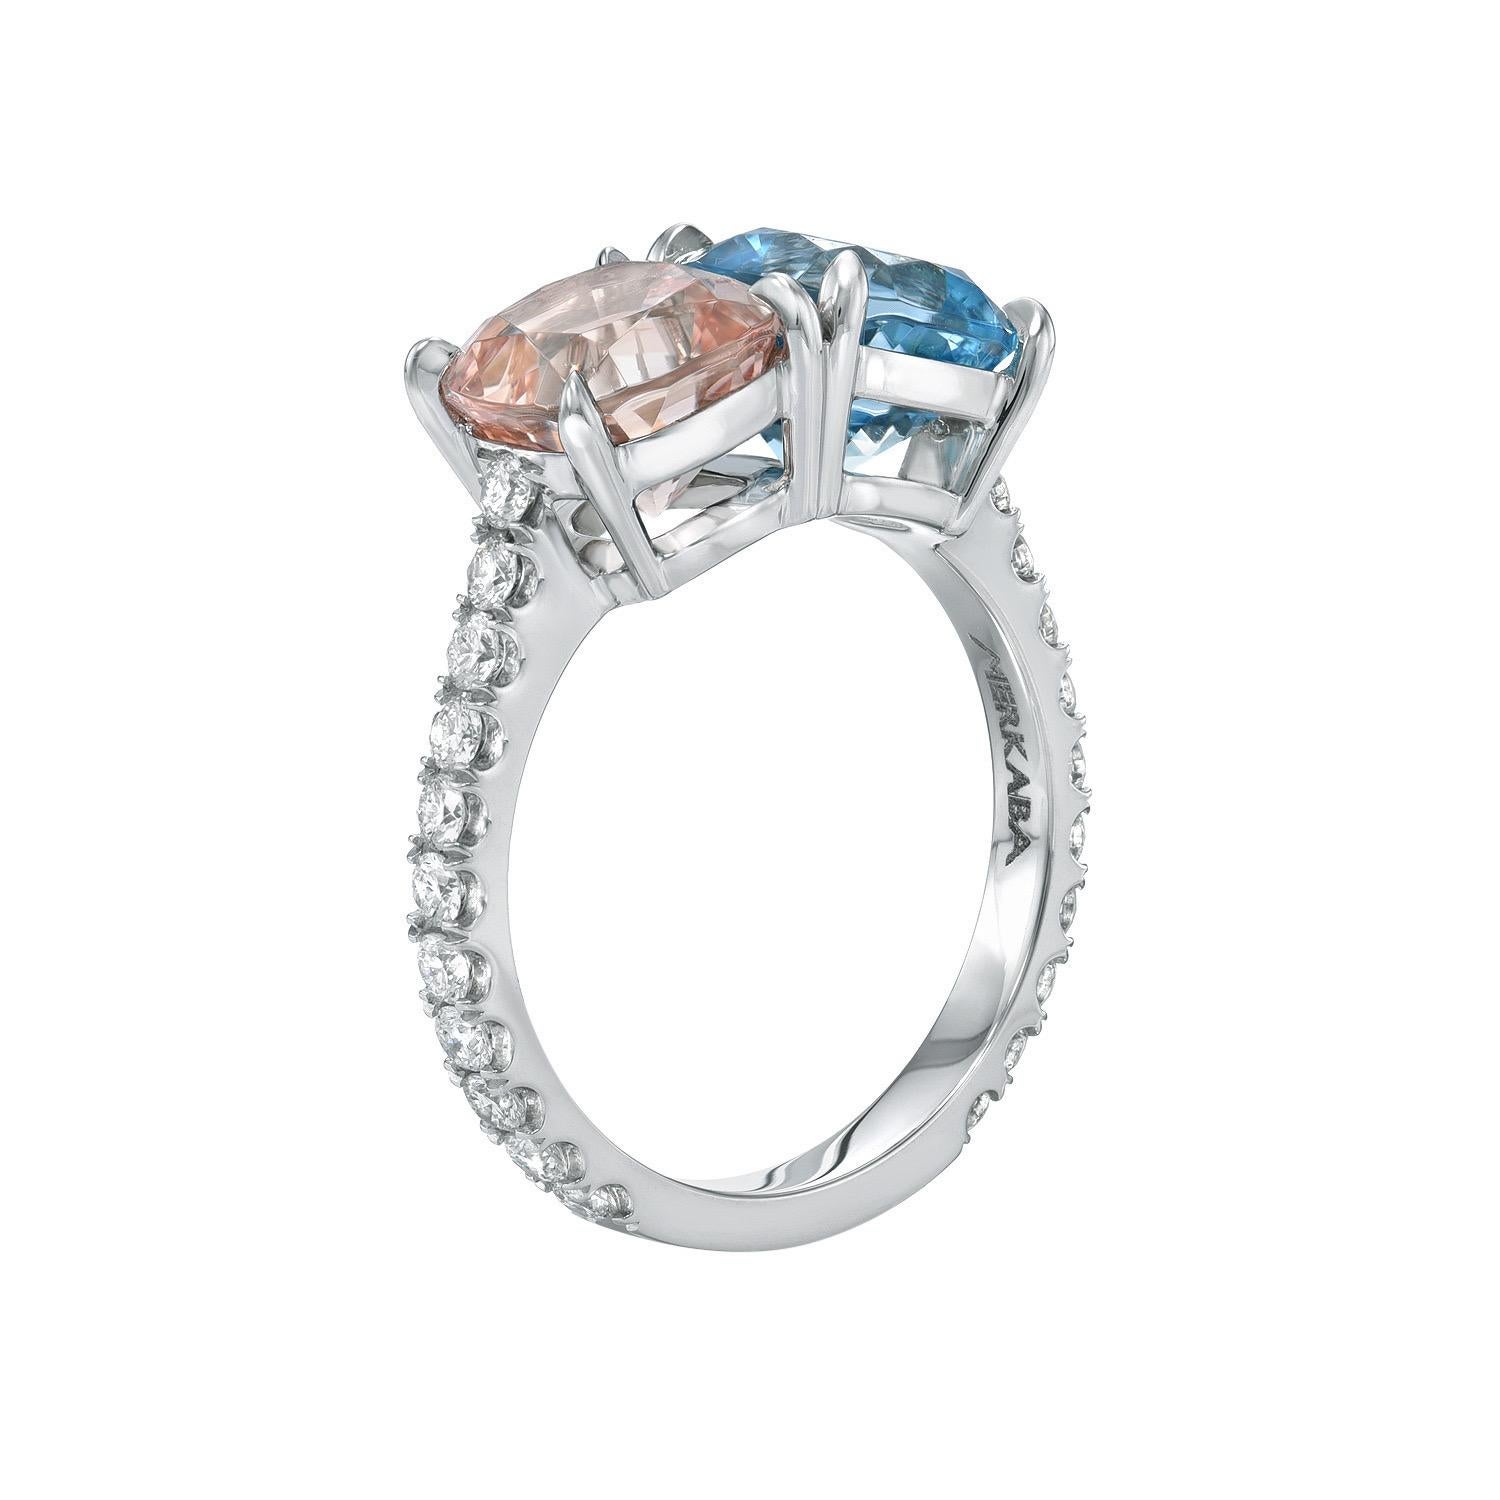 Supreme mismatched pair of Aquamarine and Morganite cushions, weighing a total of 4.02 carats, are decorated with a total of 0.55 carats of round brilliant collection diamonds, mounted in this exclusive platinum ring.
Size 6. Re-sizing is